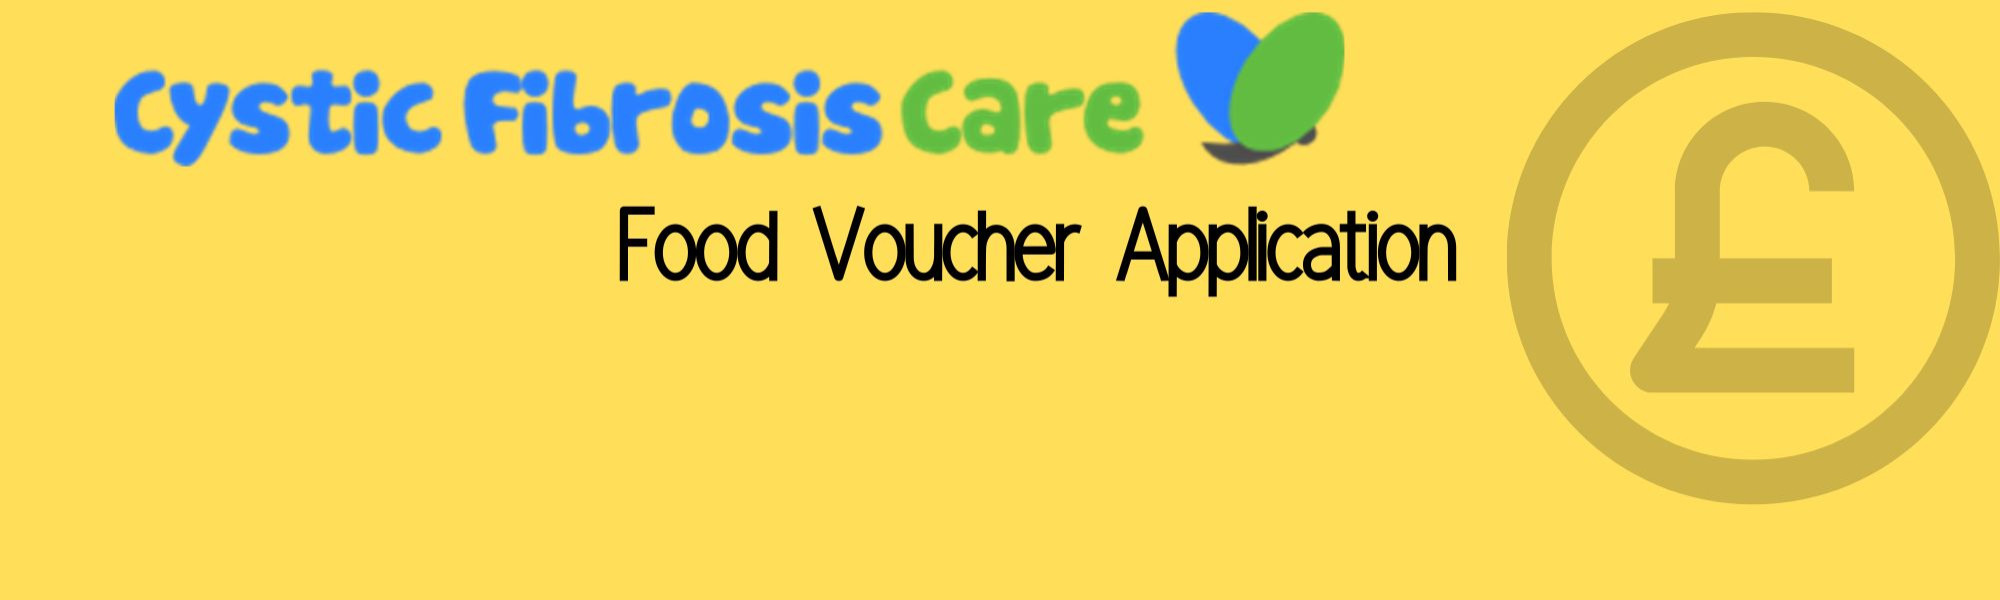 Cystic Fibrosis Care Food Voucher application